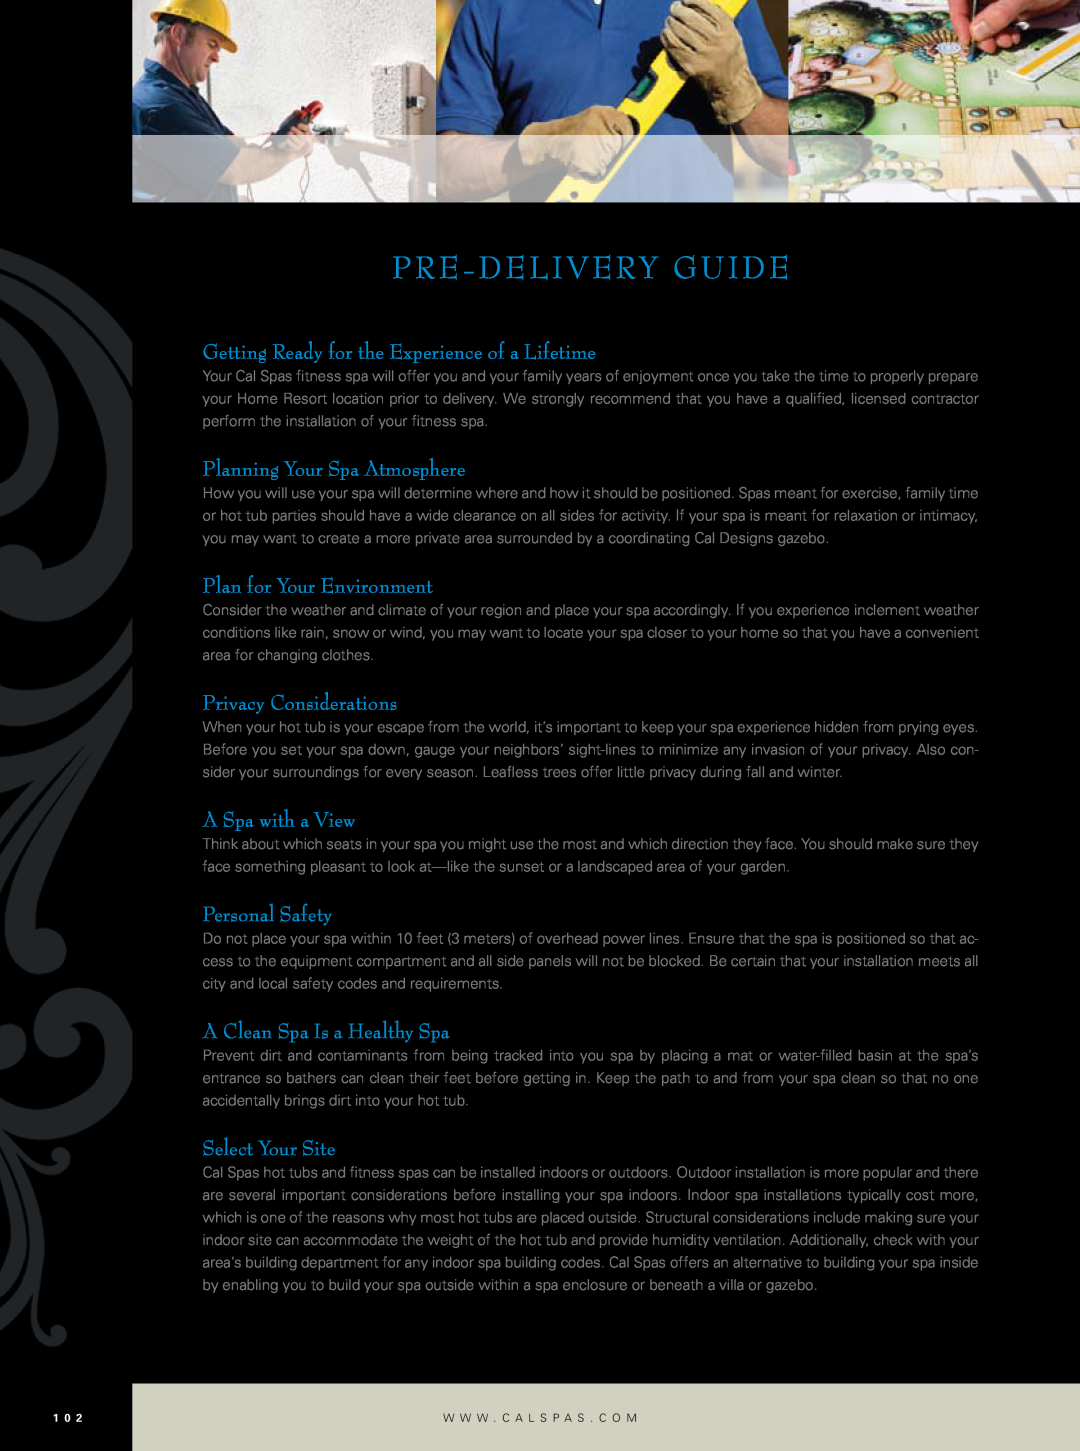 Cal Flame Hot Tub manual Pre-Deliveryguide, Getting Ready for the Experience of a Lifetime, Planning Your Spa Atmosphere 